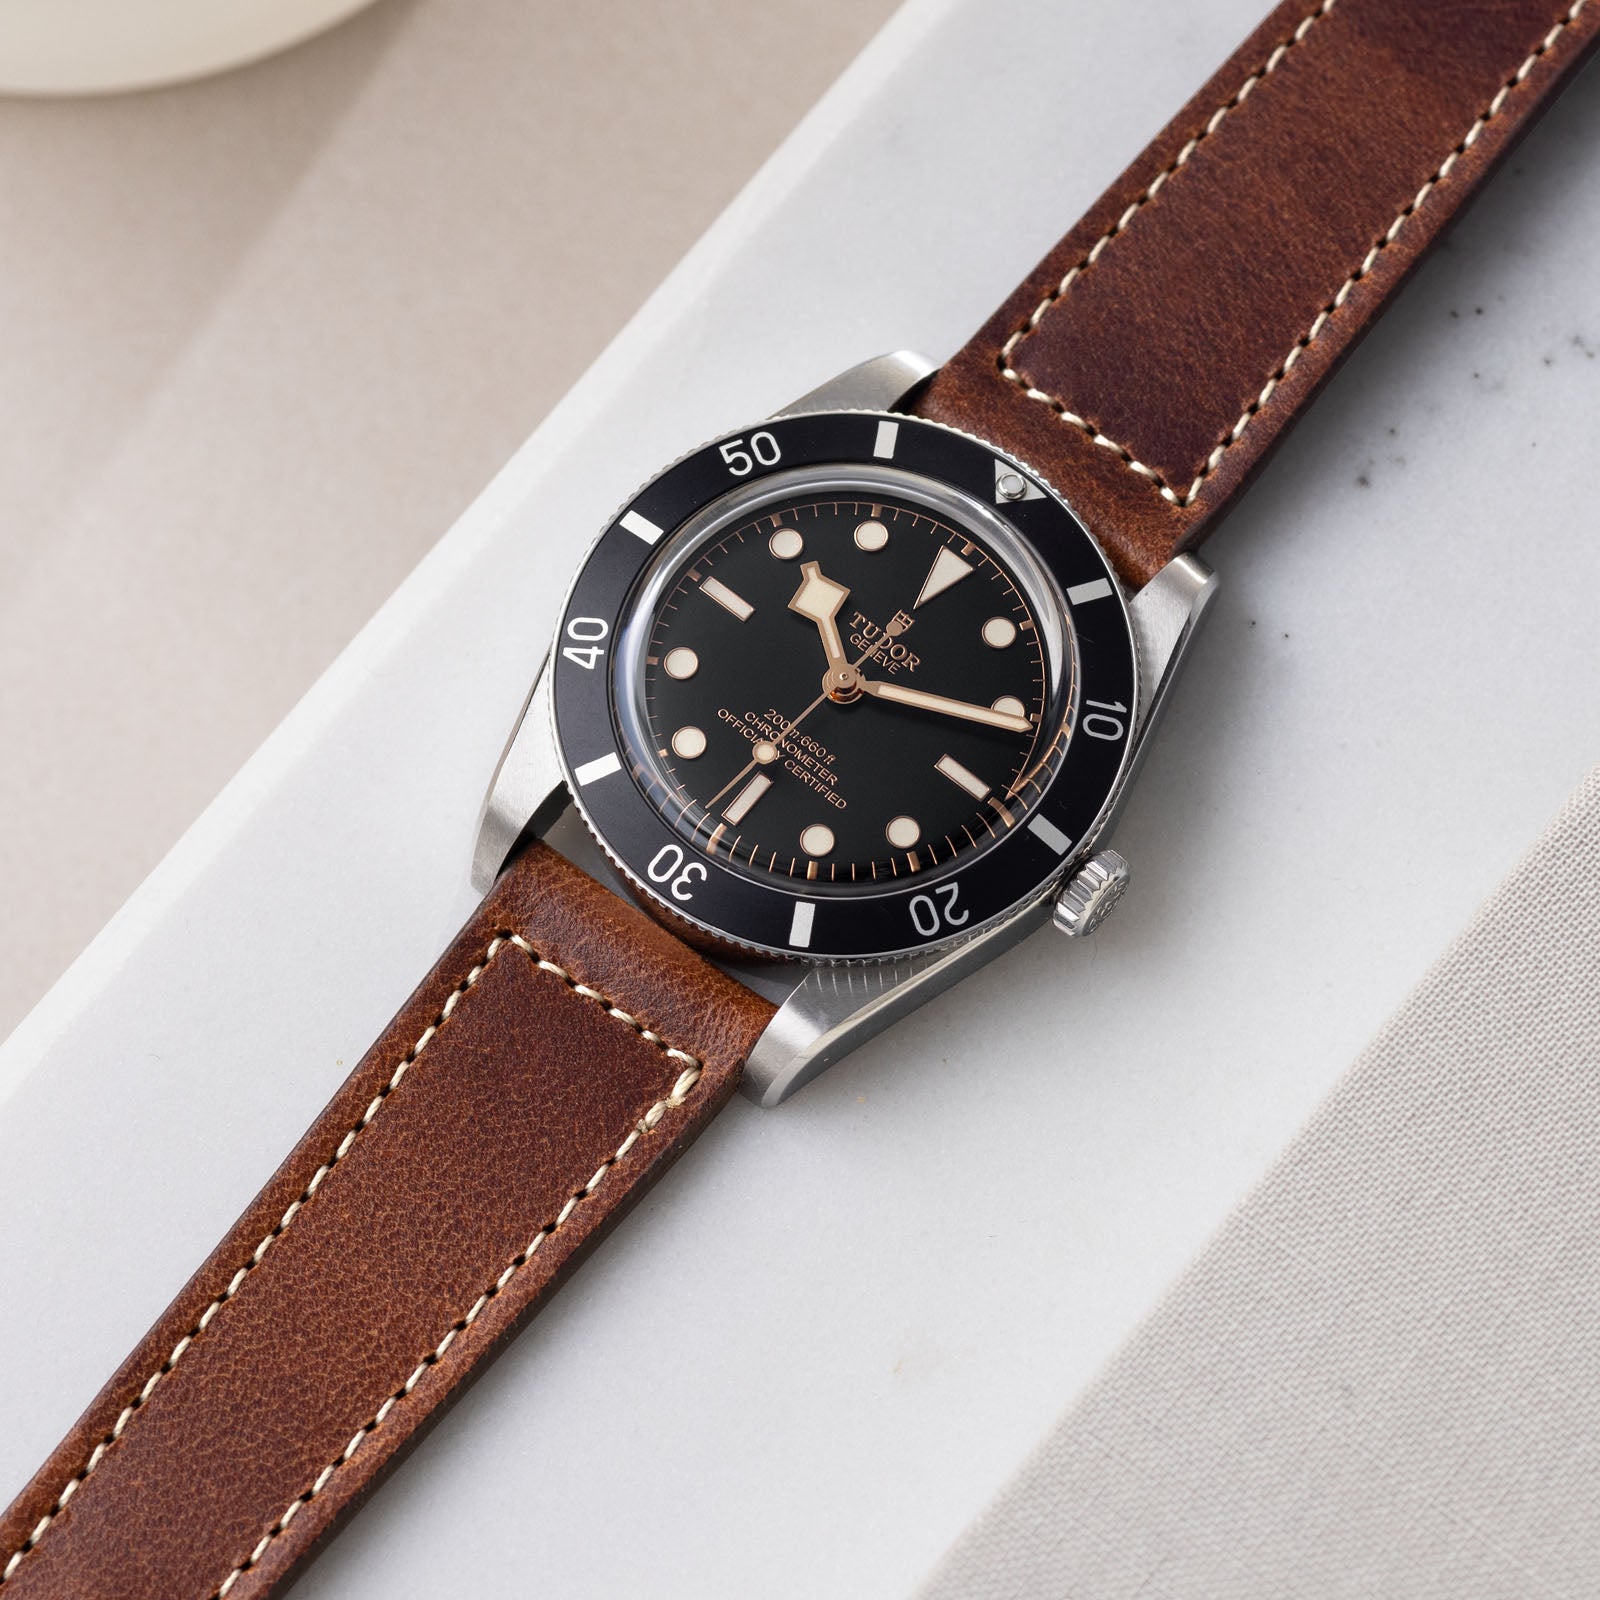 Siena Brown Boxed Stitch Leather Watch Strap